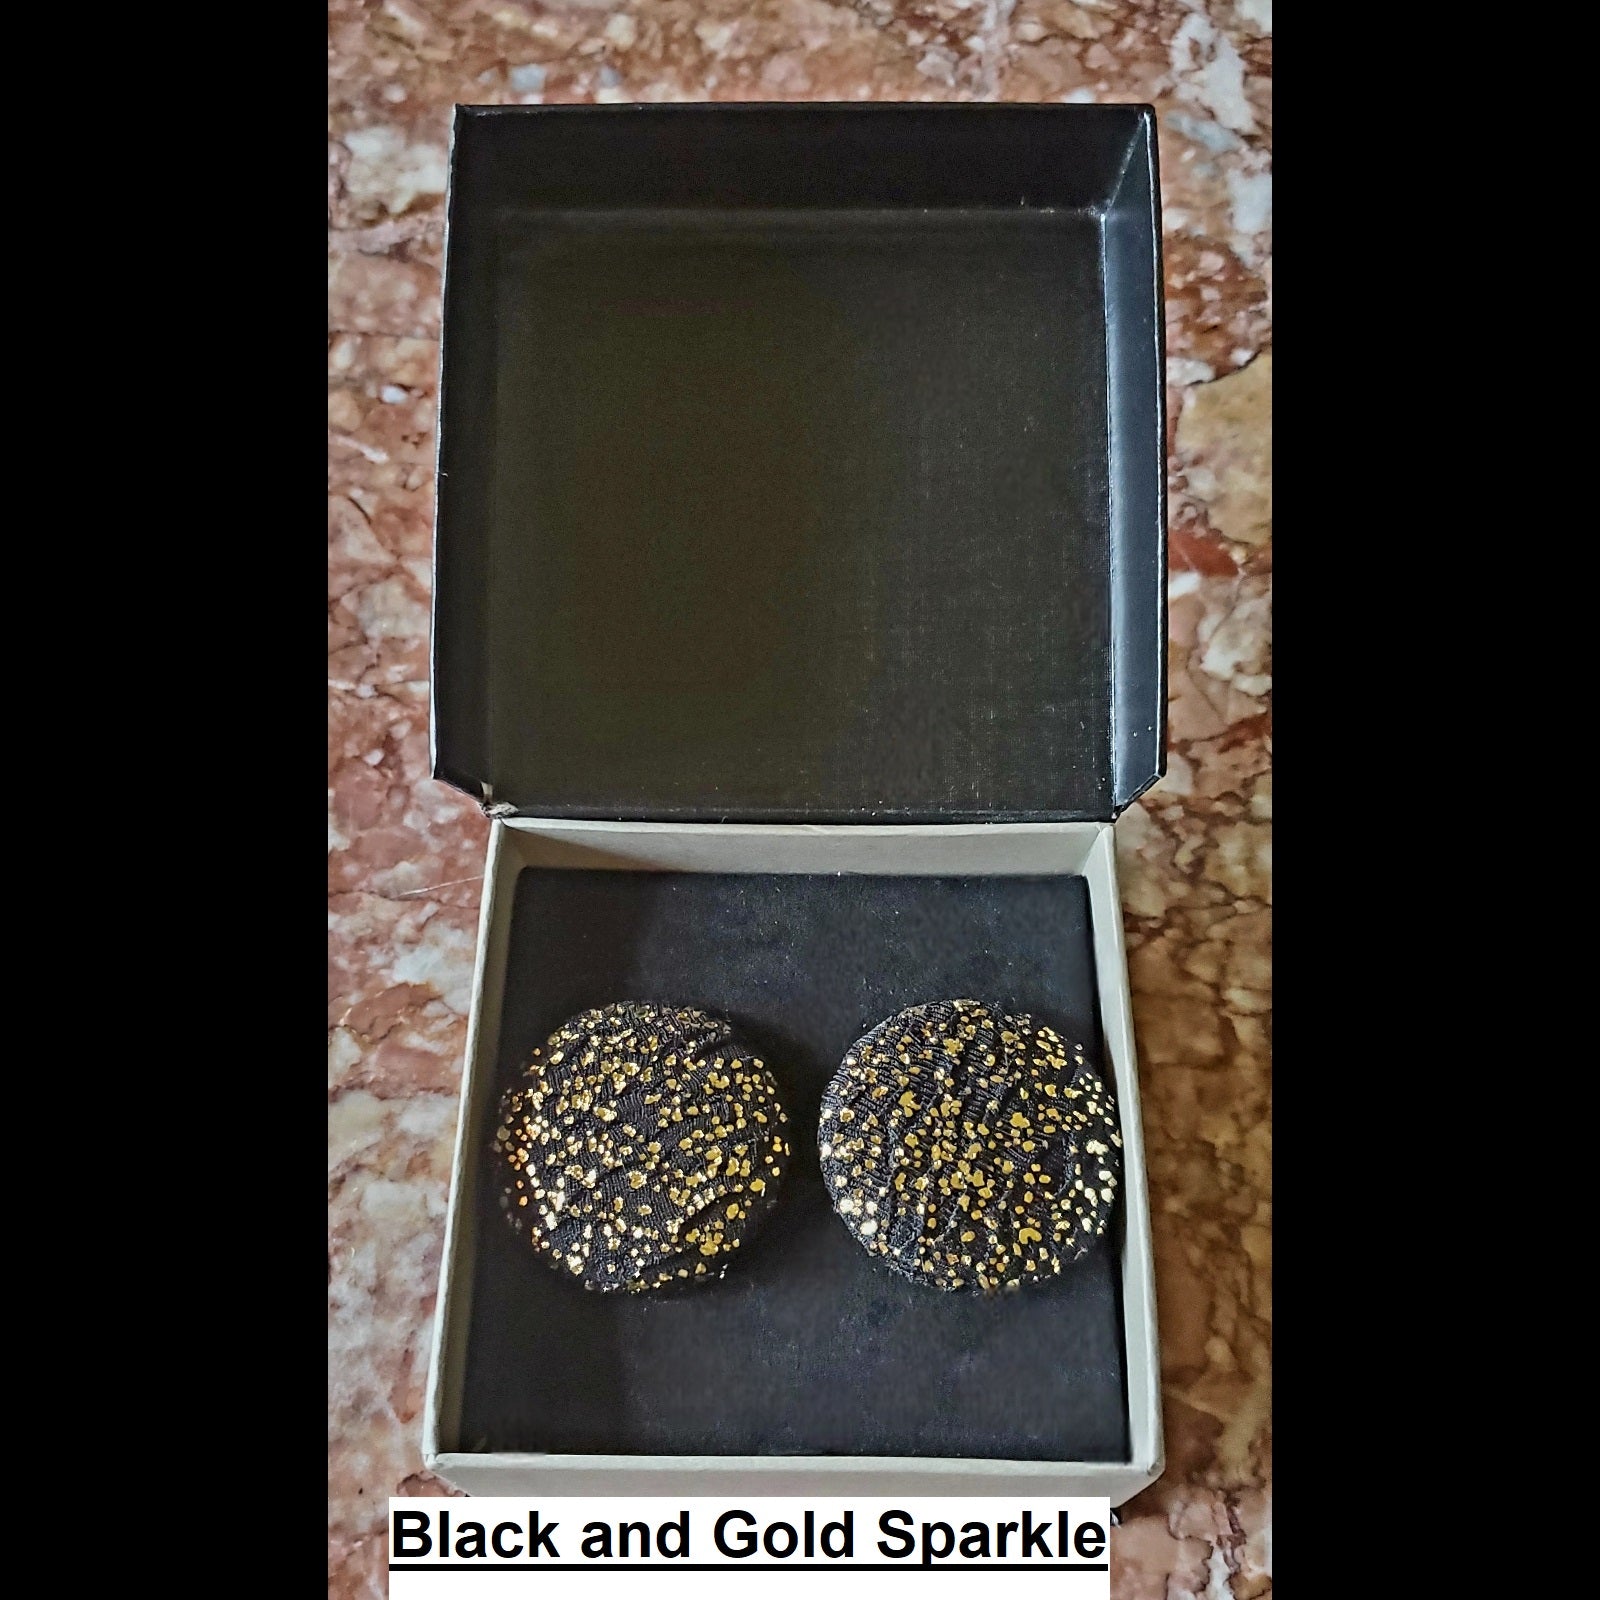 Black and gold sparkle print button earrings in jewelry box